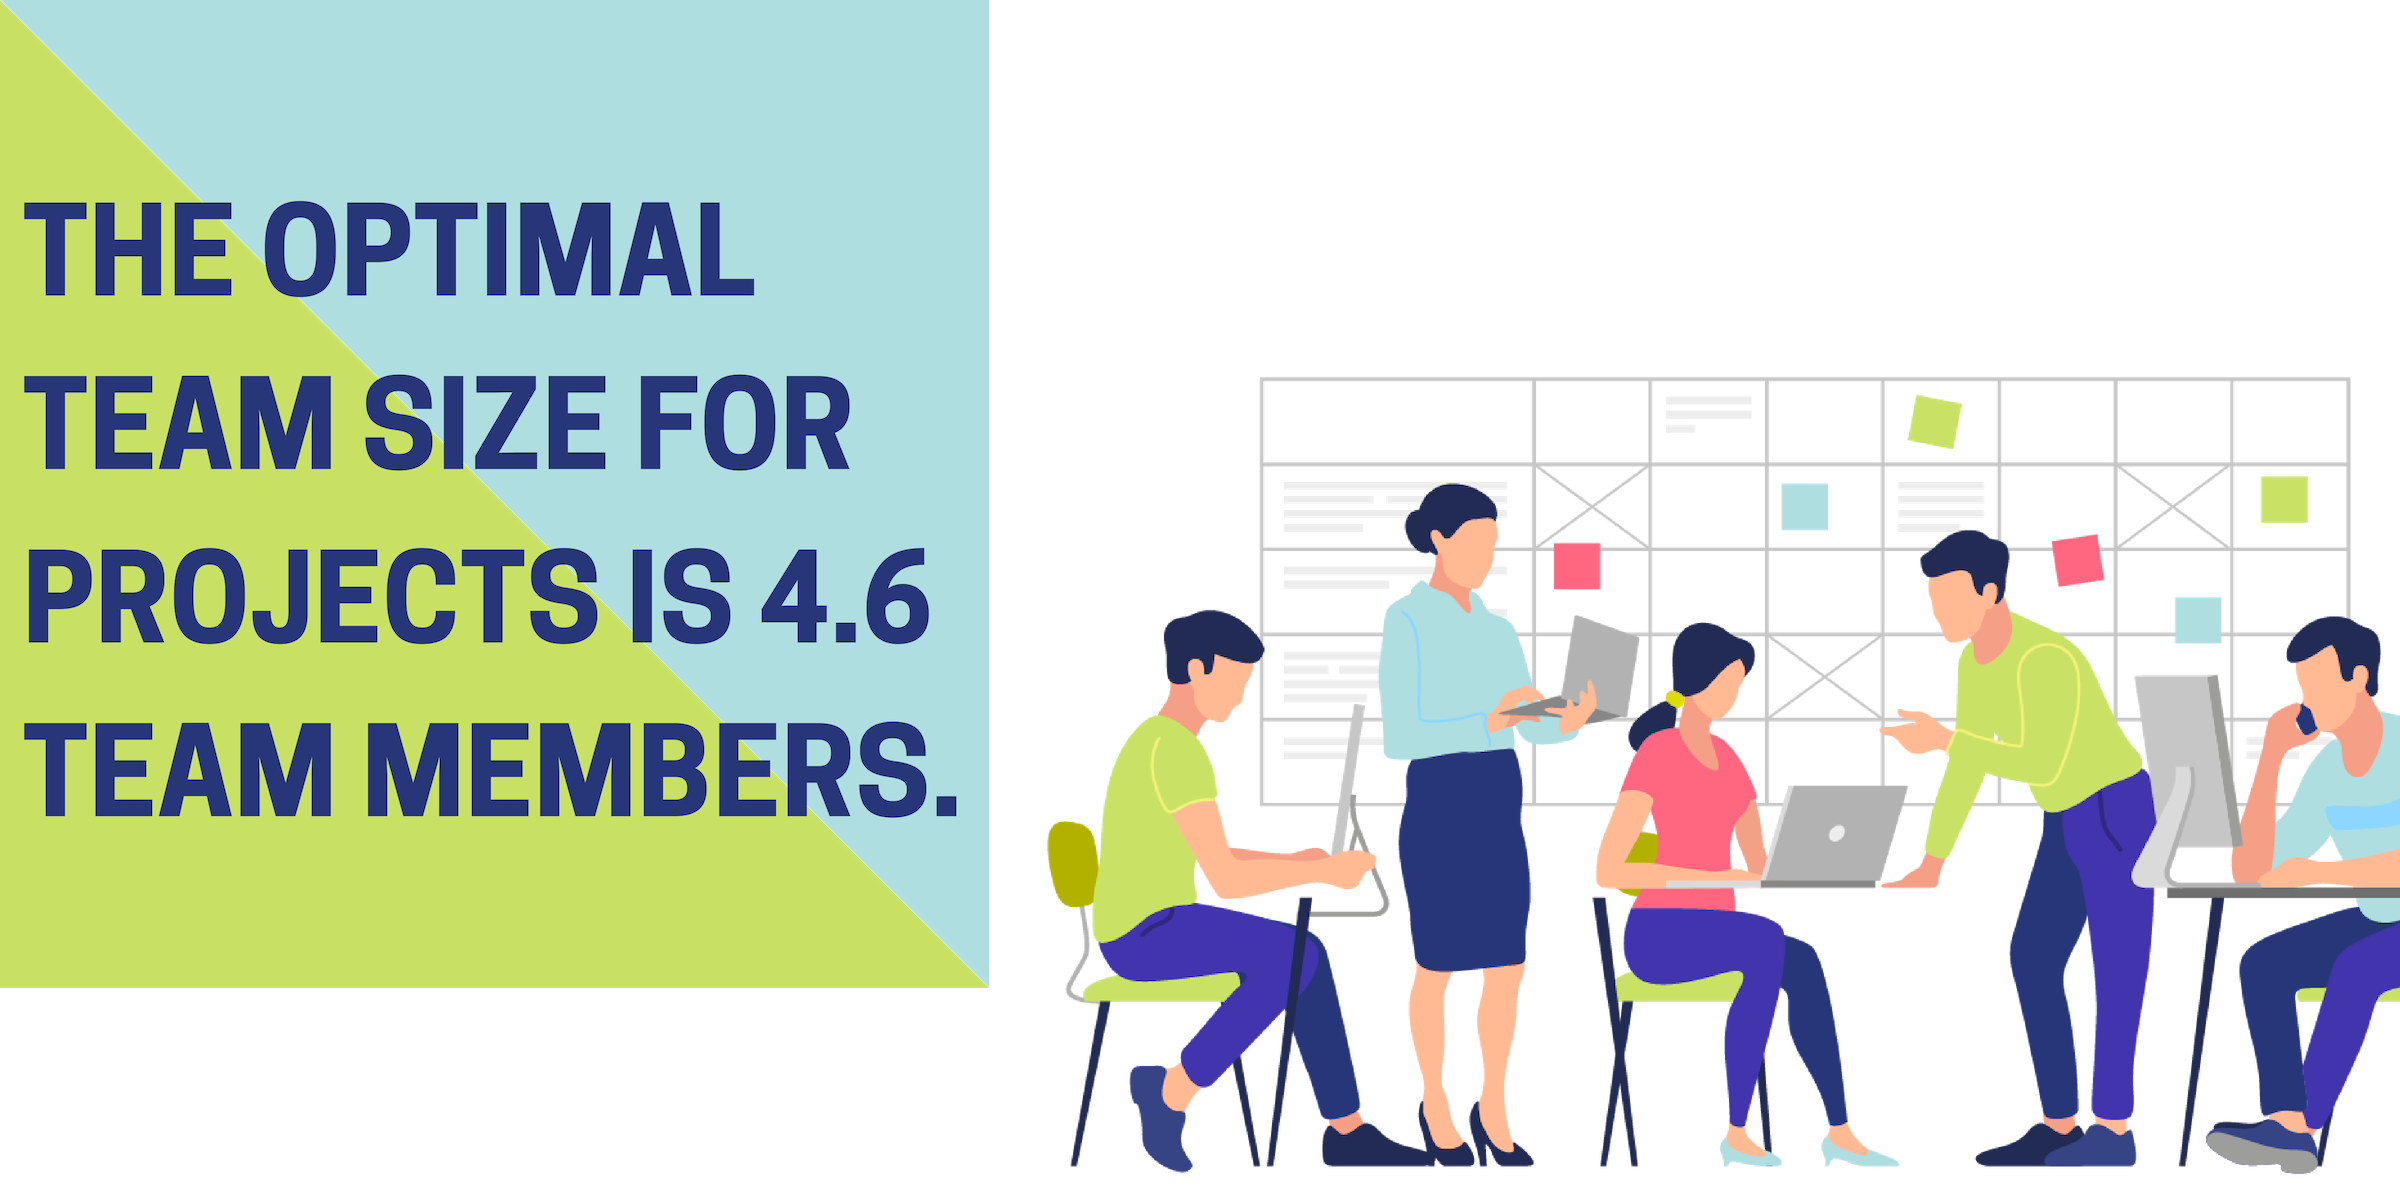 The optimal team size for projects is 4.6 team members.